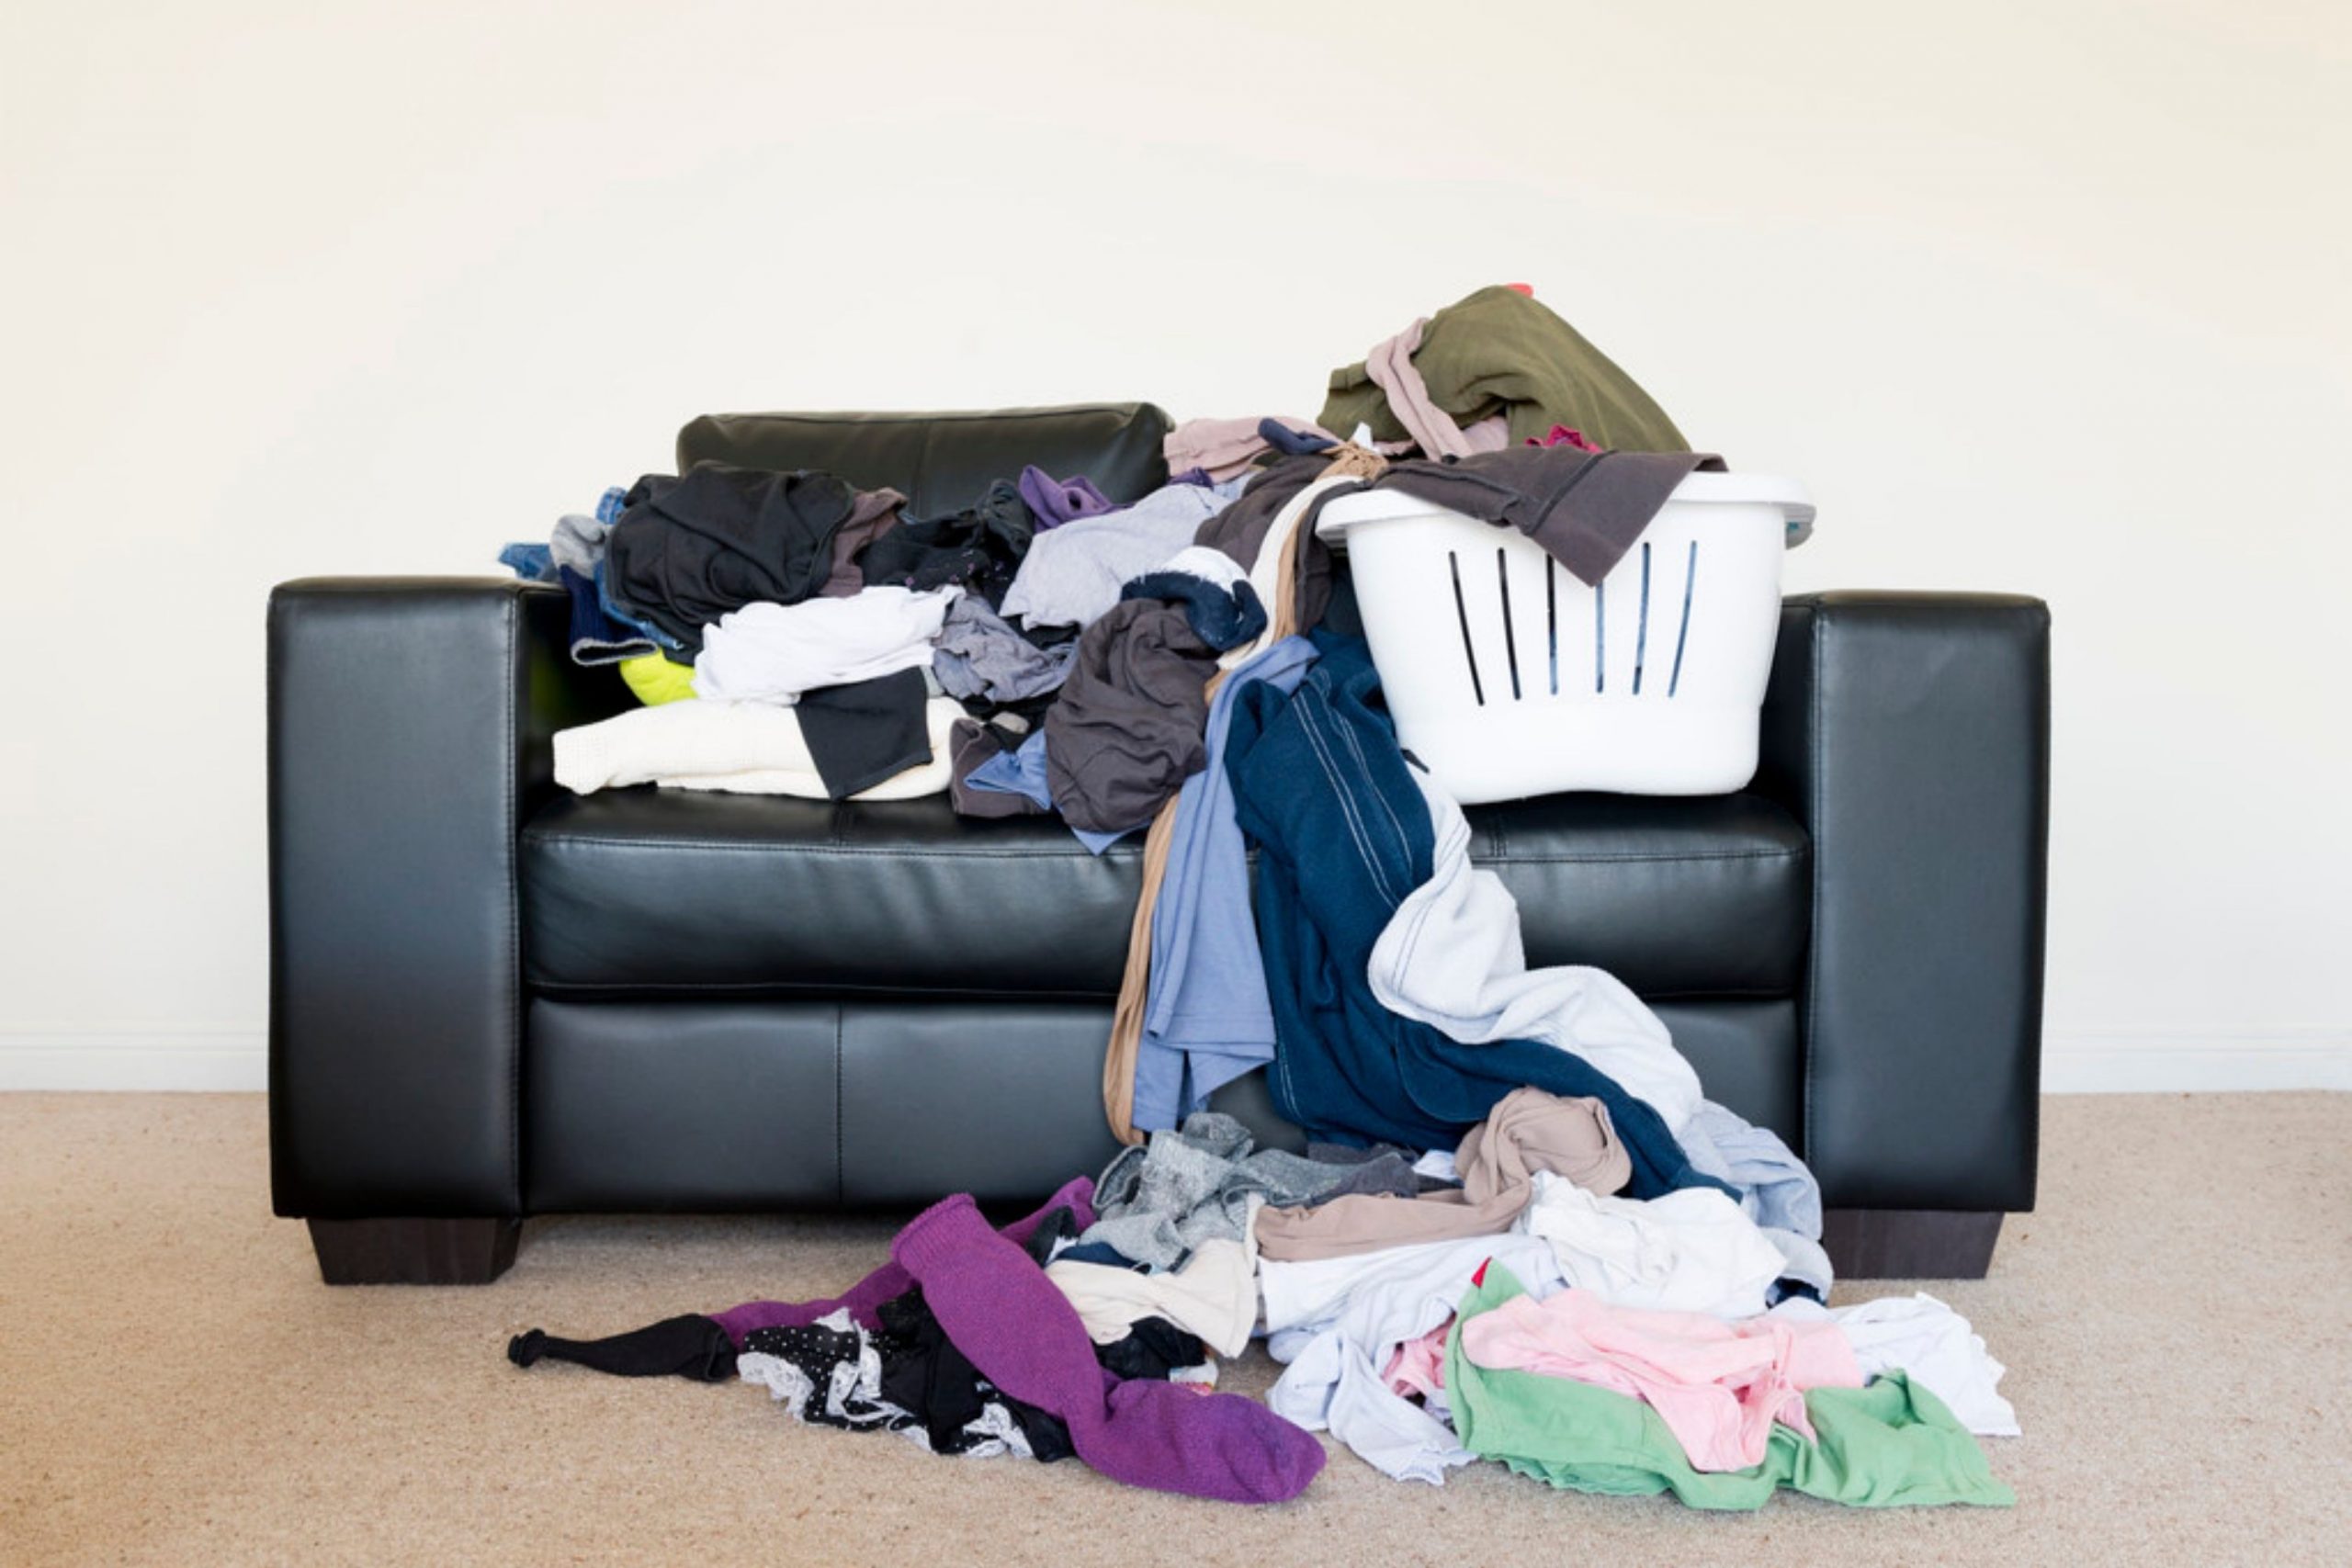 What Makes People Live In Messy Homes